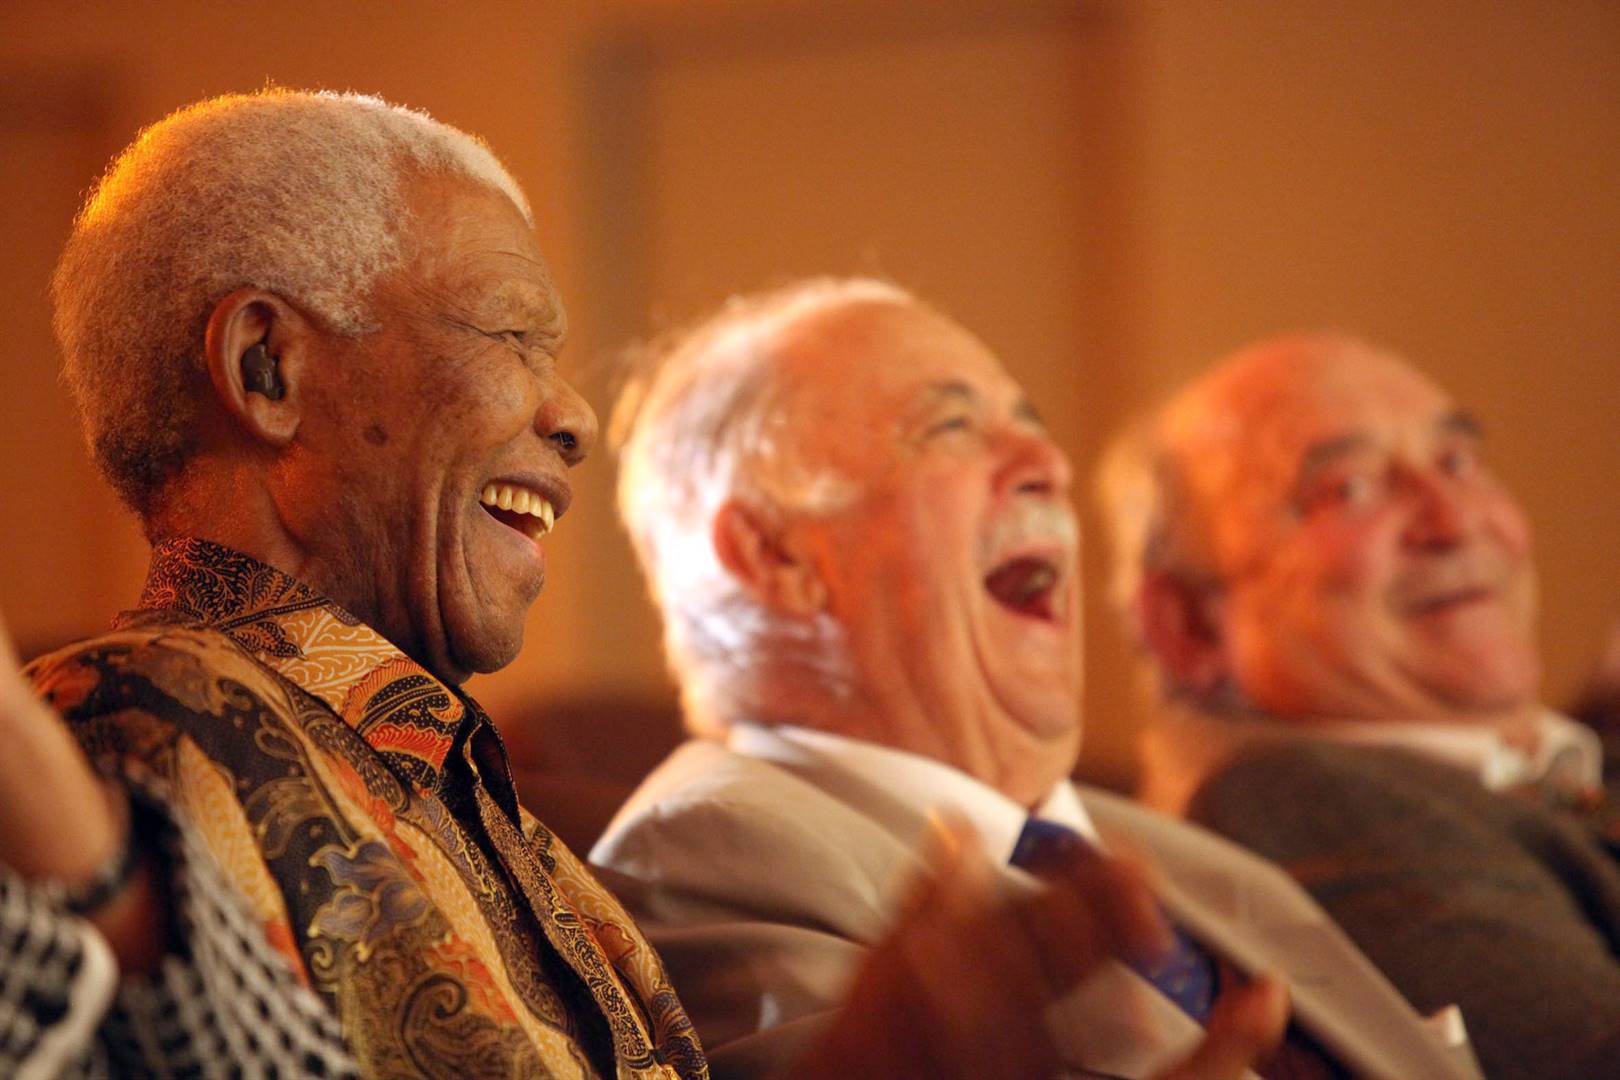 Former president Nelson Mandela, Advocate George Bizos and Denis Goldberg watch the one-person show, The Rivonia Trial, performed by Monde Wani in 2009. Photo: Debbie Yazbek/Nelson Mandela Foundation